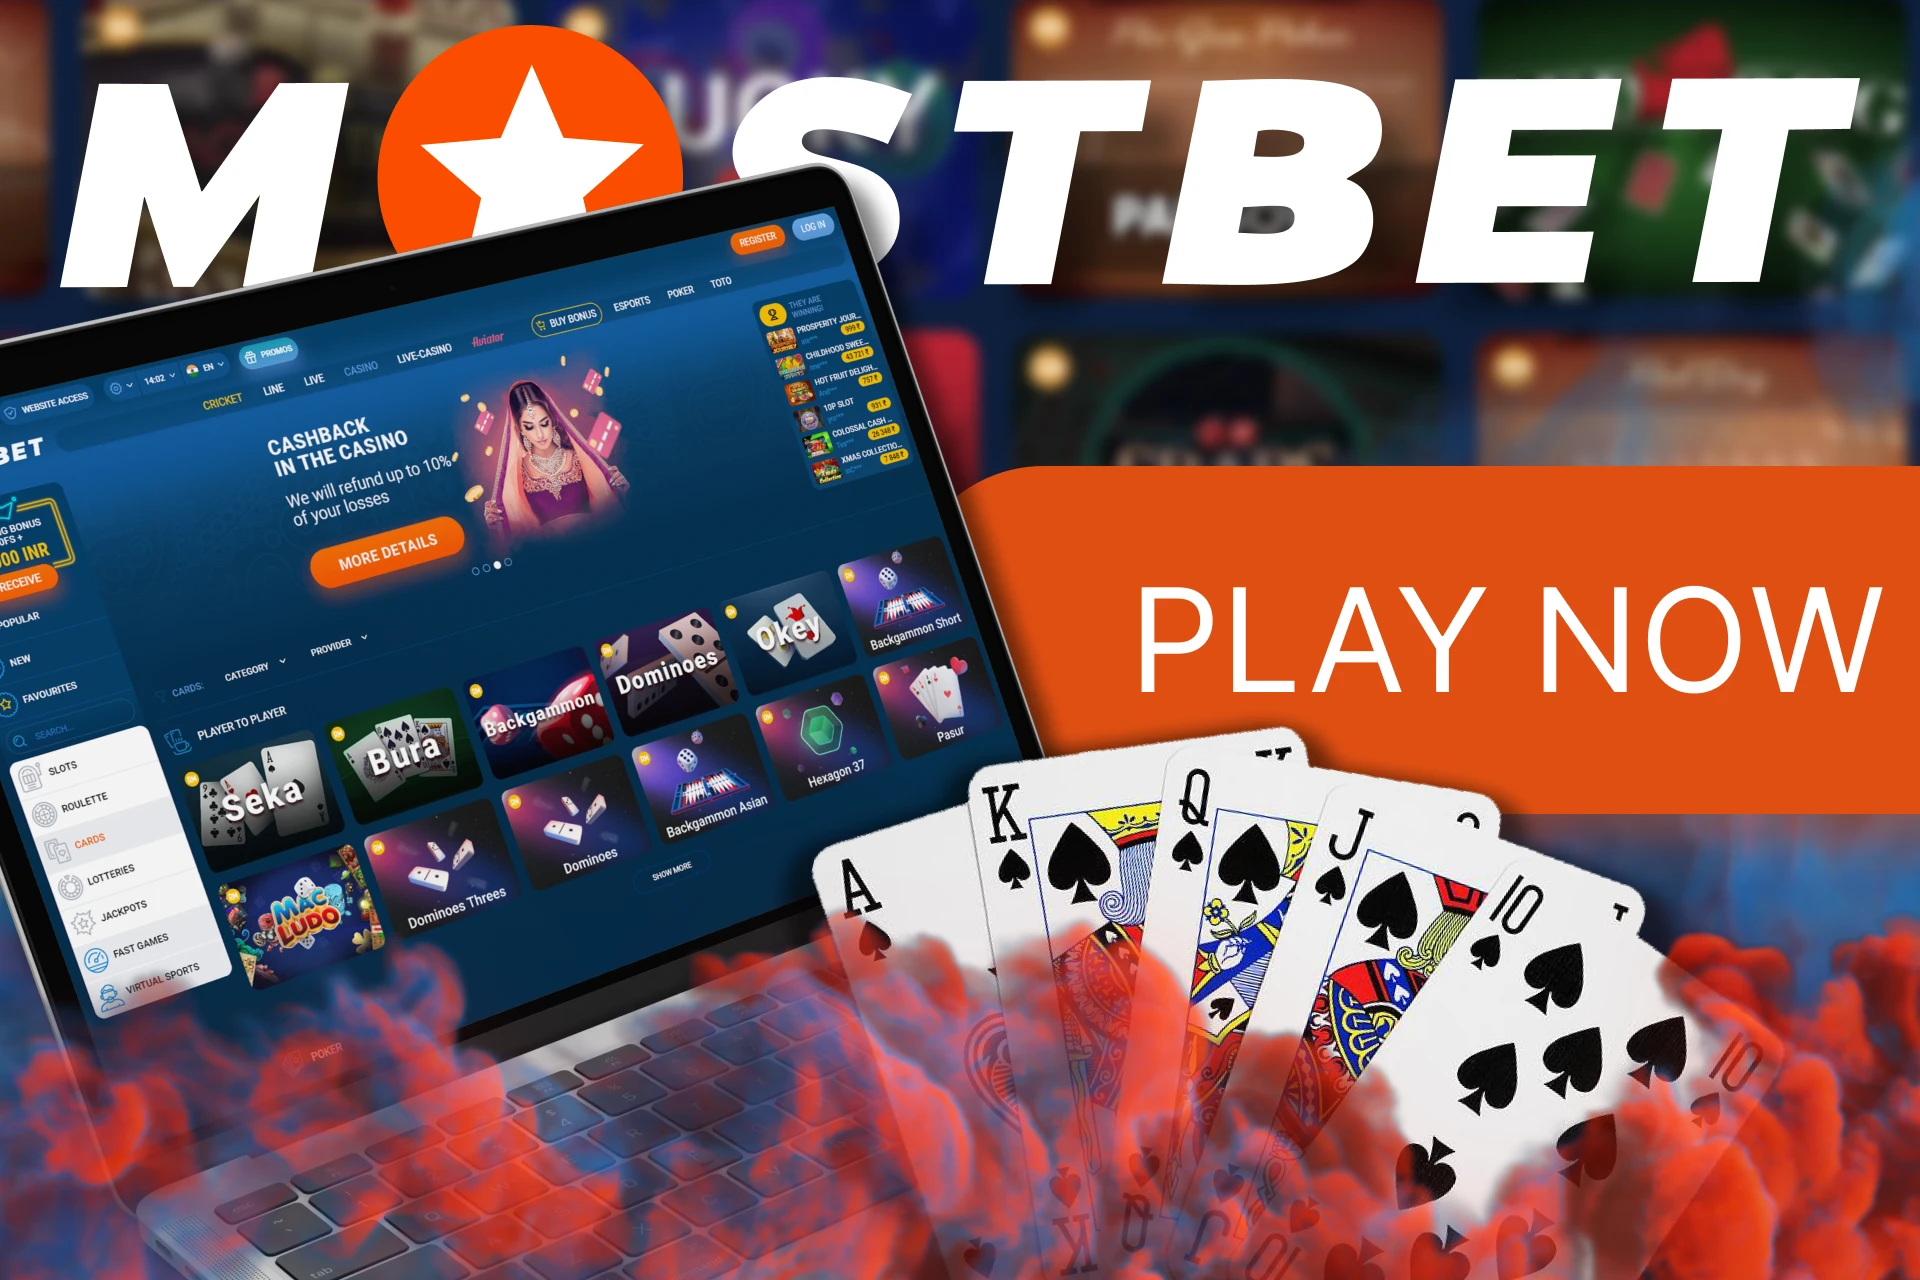 Play the incredible game of Bura at Mostbet.